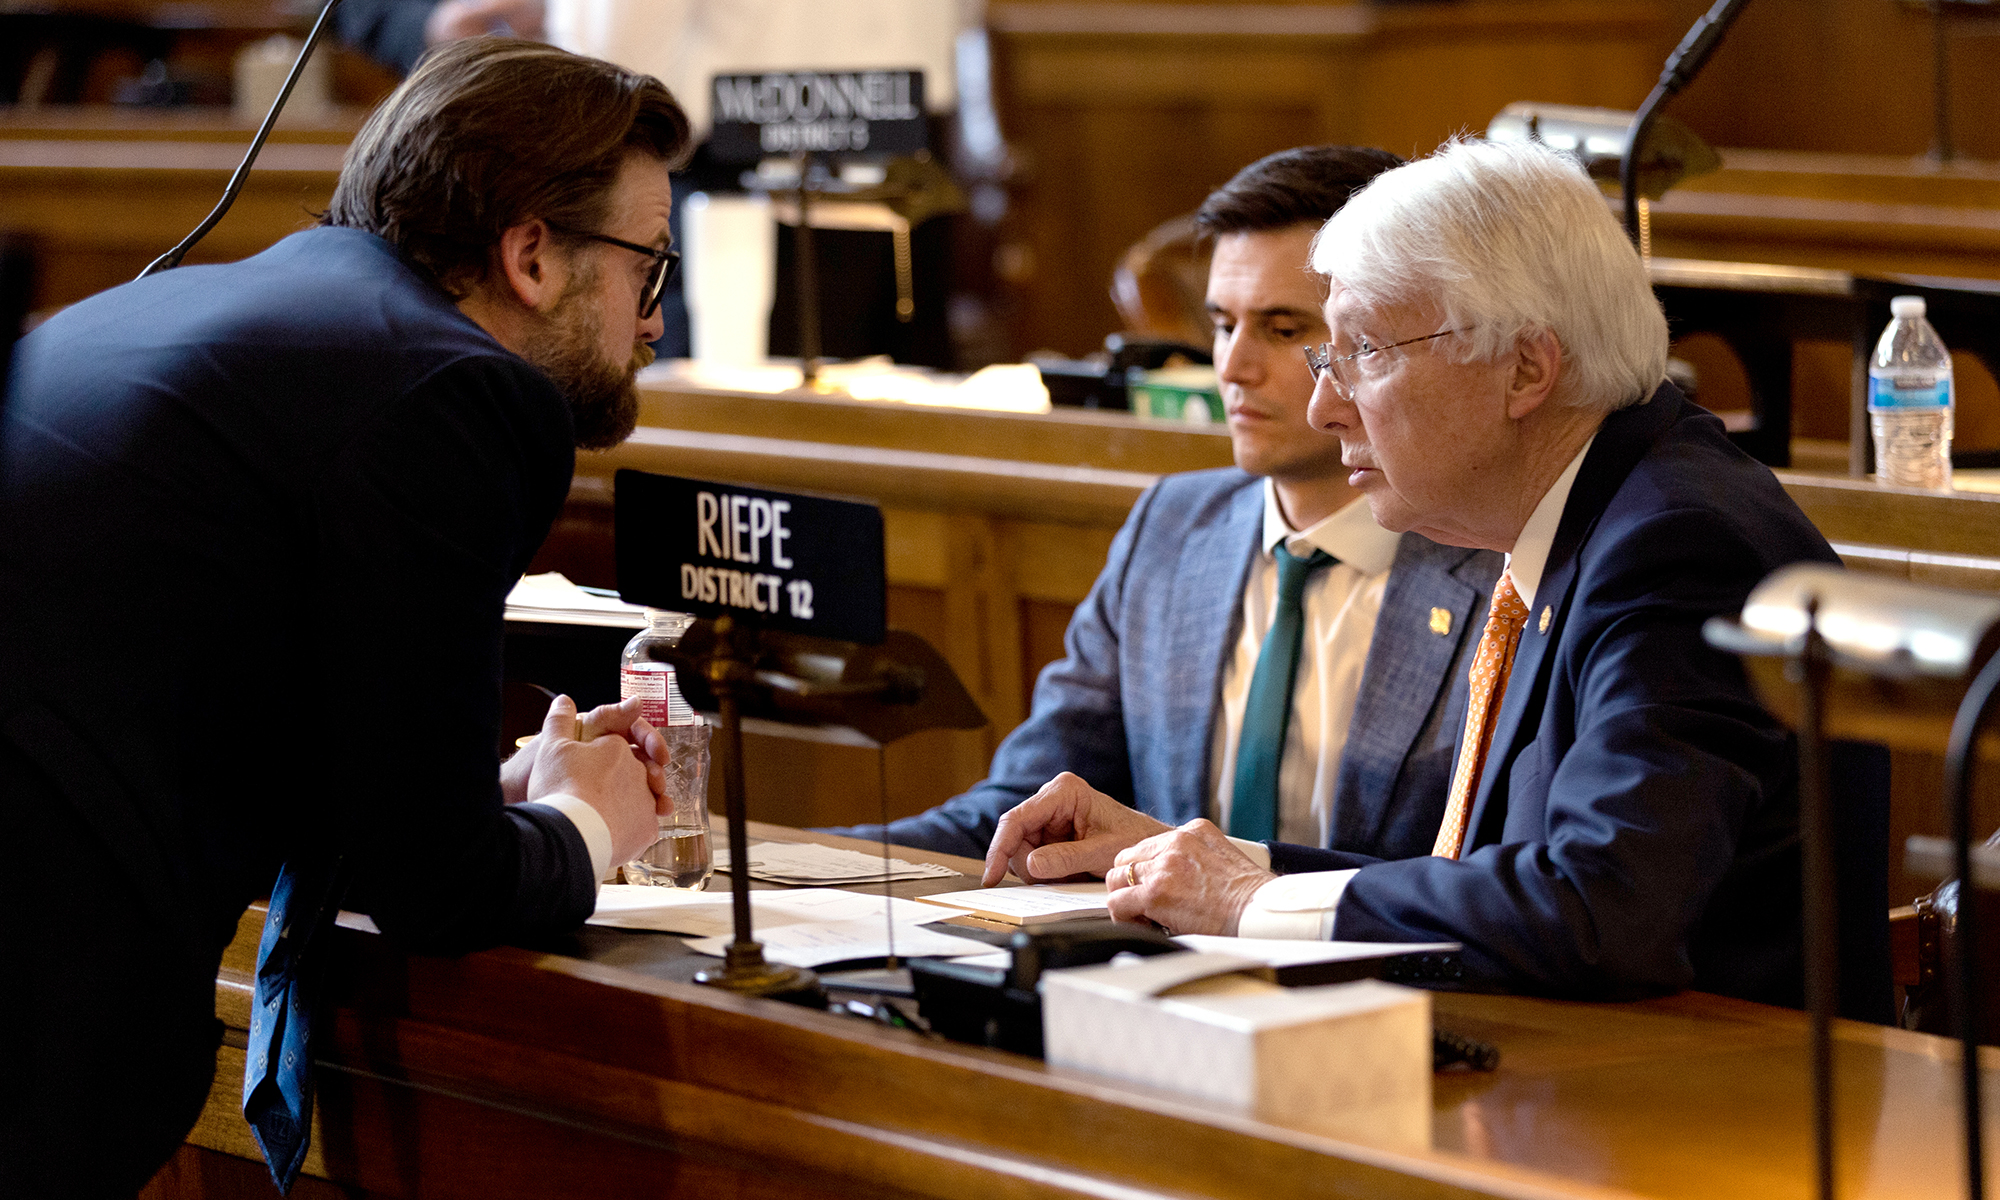 From left, Nebraska Sens. George Dungan III, John Fredrickson and Merv Riepe talk on the floor of the Legislature on April 26, 2023. Lawmakers debated a bill to ban abortion at approximately six weeks of pregnancy, but Riepe, a Republican, abstained from the vote, thus killing the bill. (Photo by Joseph Kual Zakaria/News21)